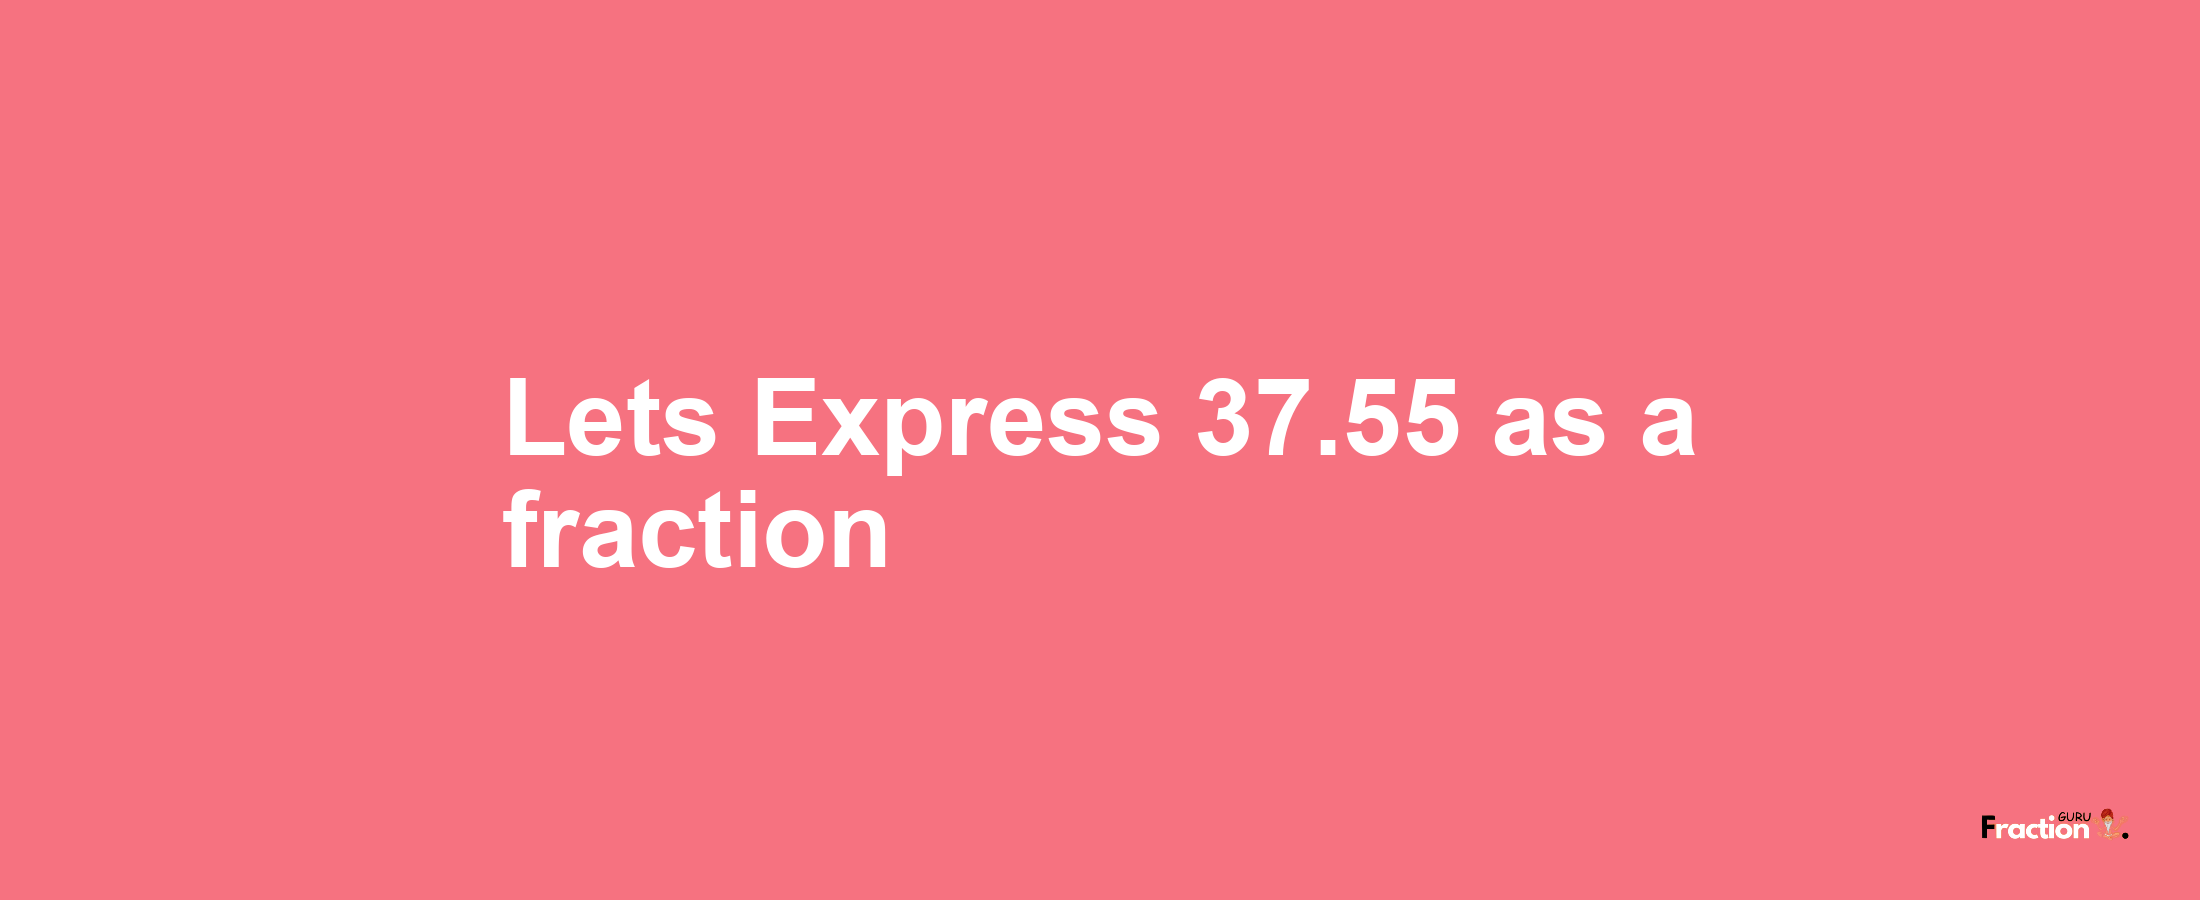 Lets Express 37.55 as afraction